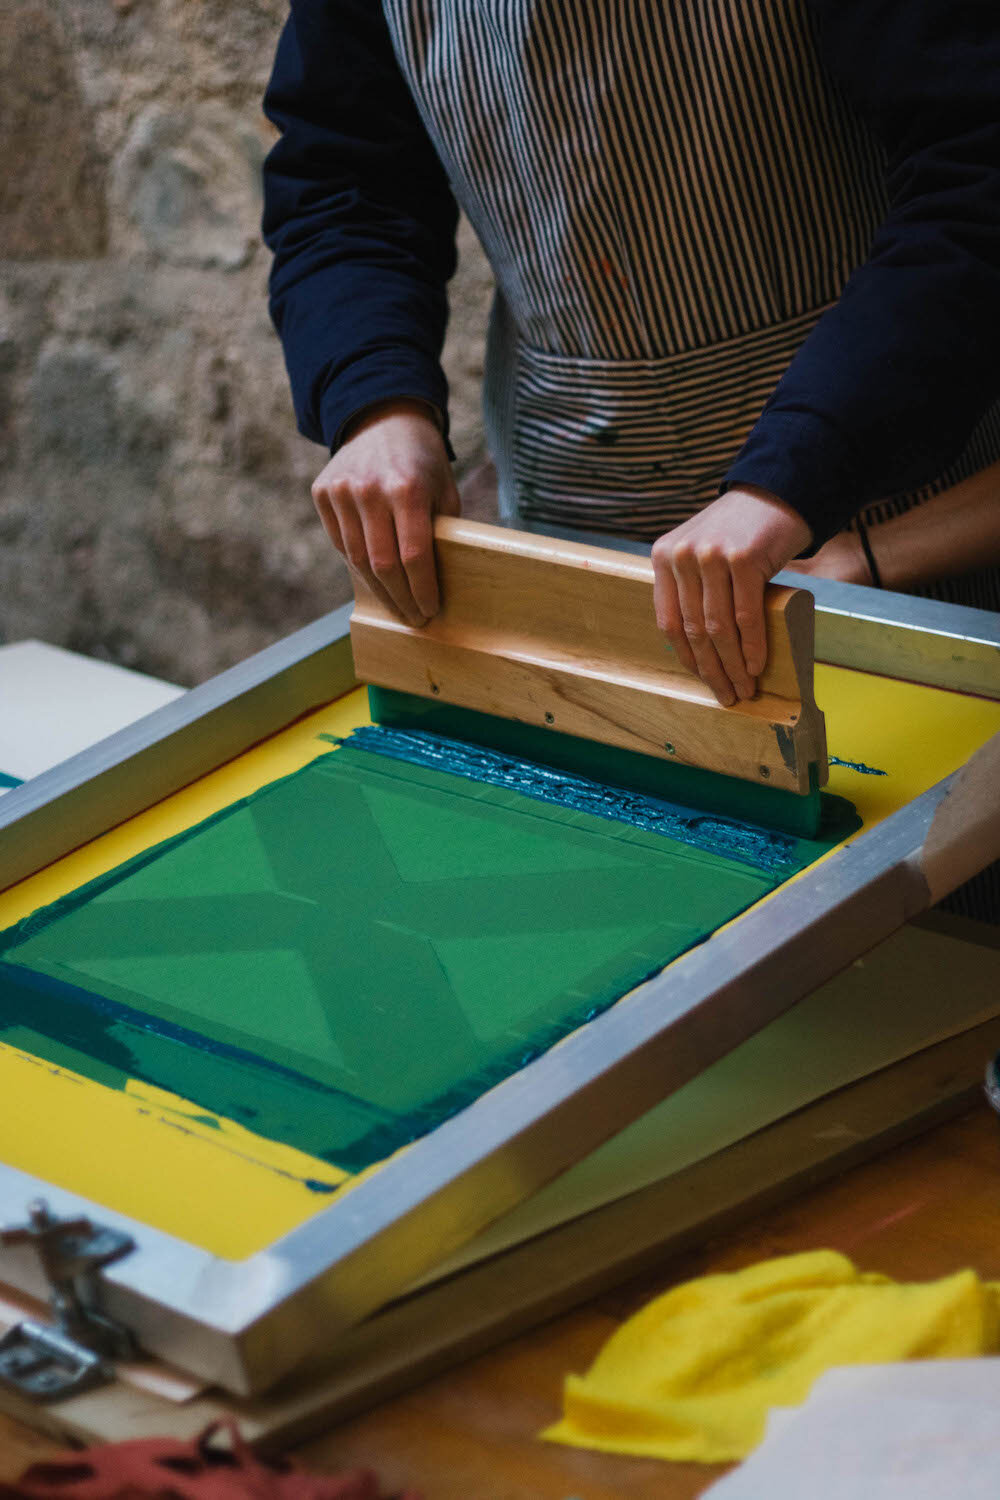 The Compact Guide to Screenprinting at Glen Dye - The Good Life Society 2.jpg